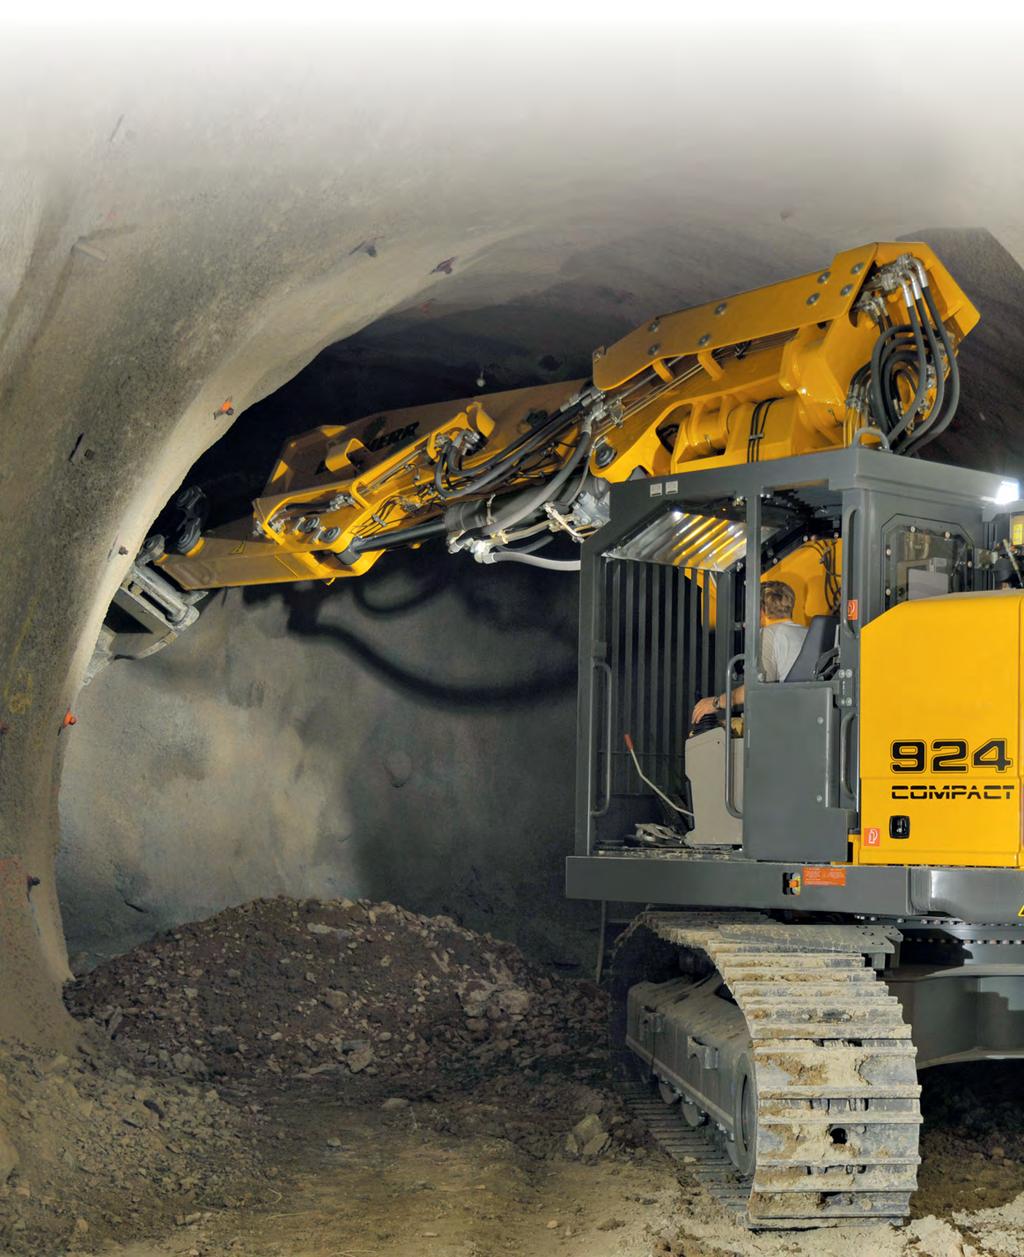 R 924 Copact R 944 C Operating Weight: Engine Output: Tunnel eight:,000-4,00 kg 129 kw / 17 P 4.7-7.